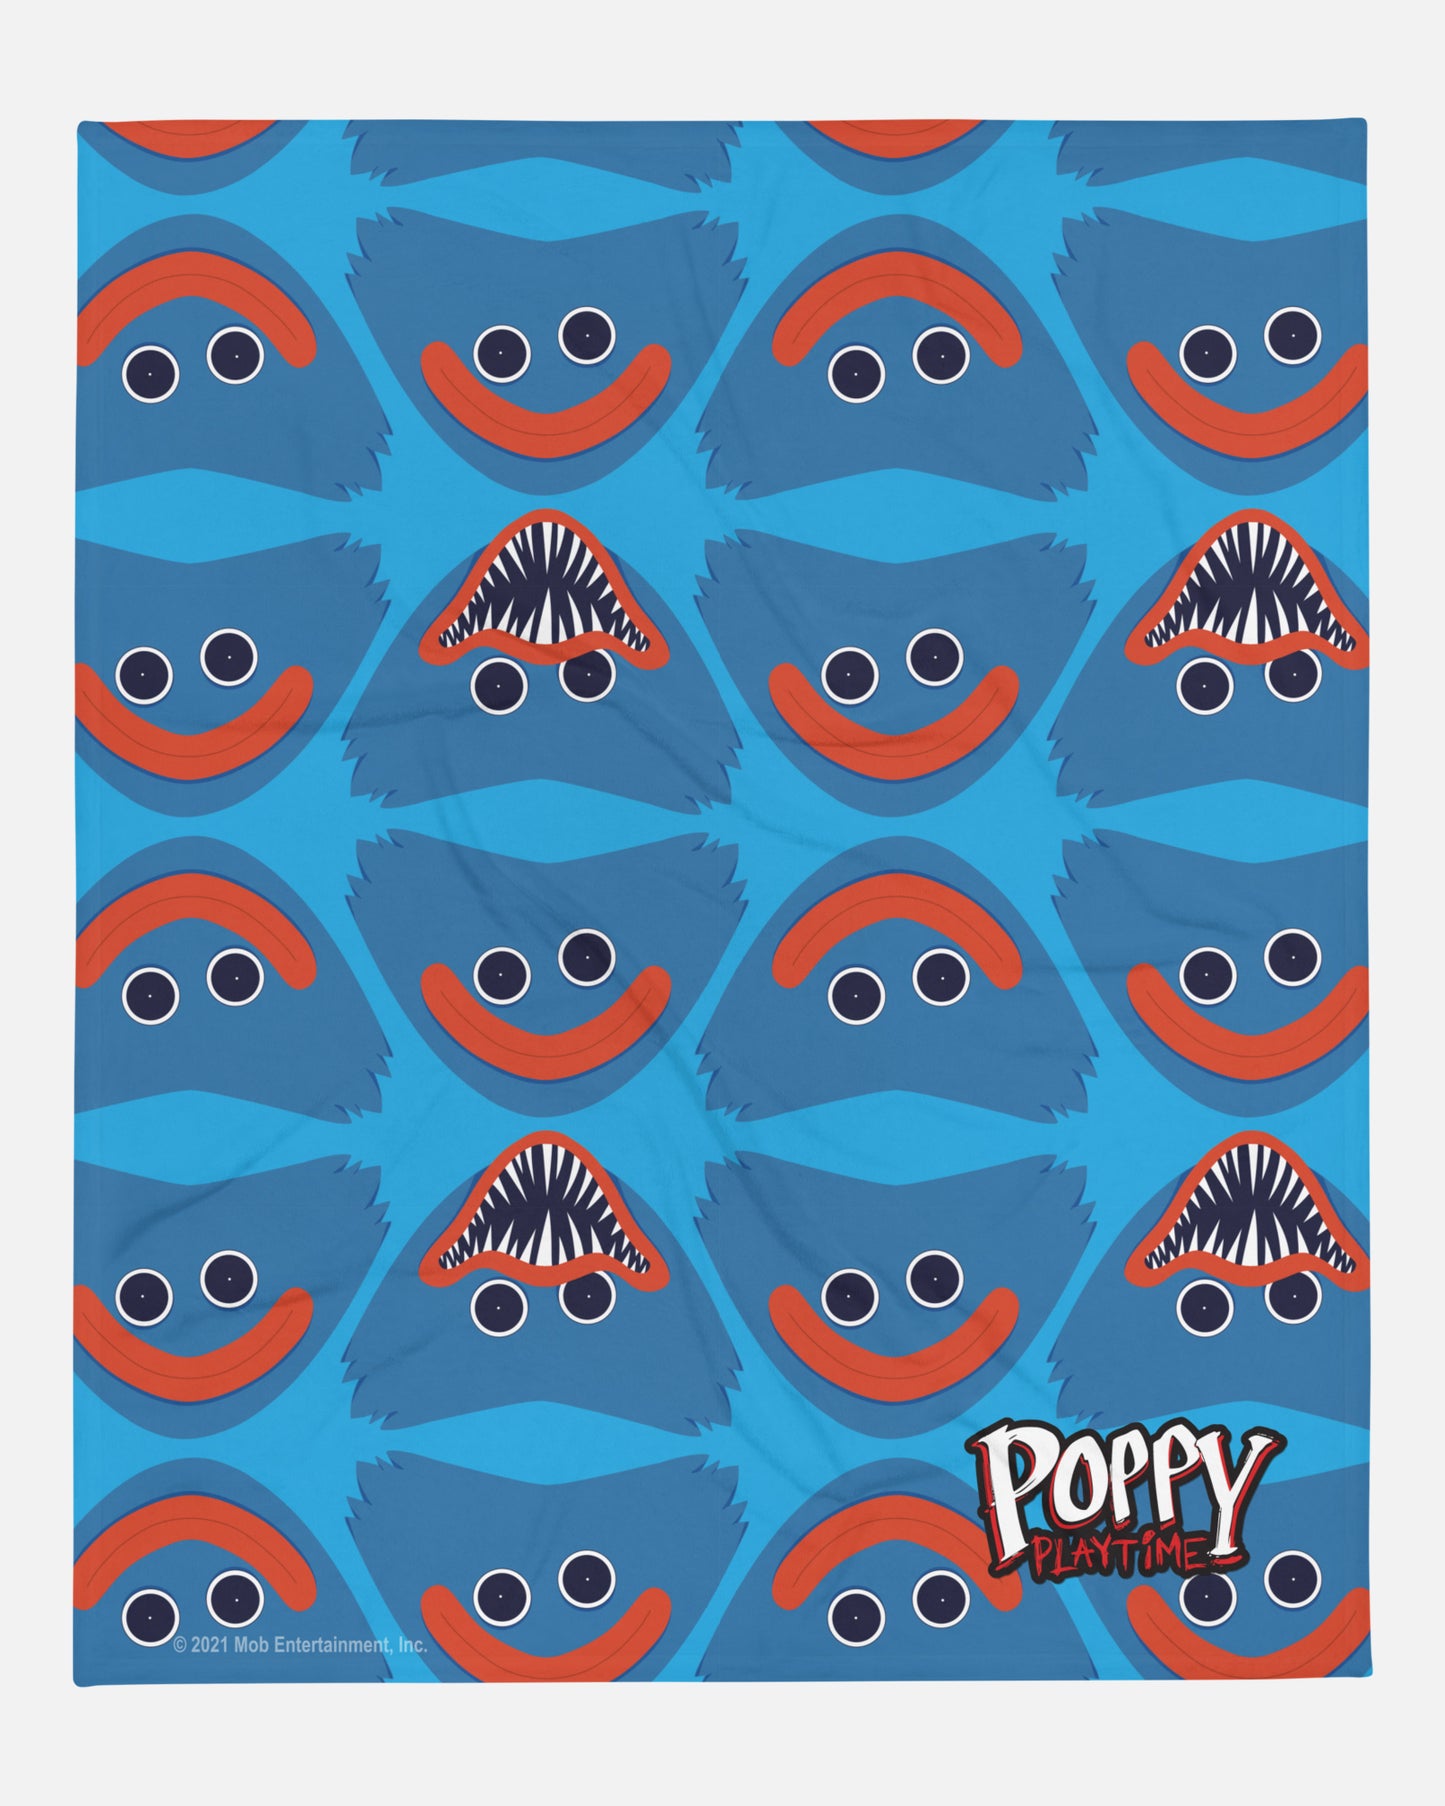 huggy wuggy pattern blanket. image: repeating pattern of huggy wuggy evil and smiling face text: poppy playtime